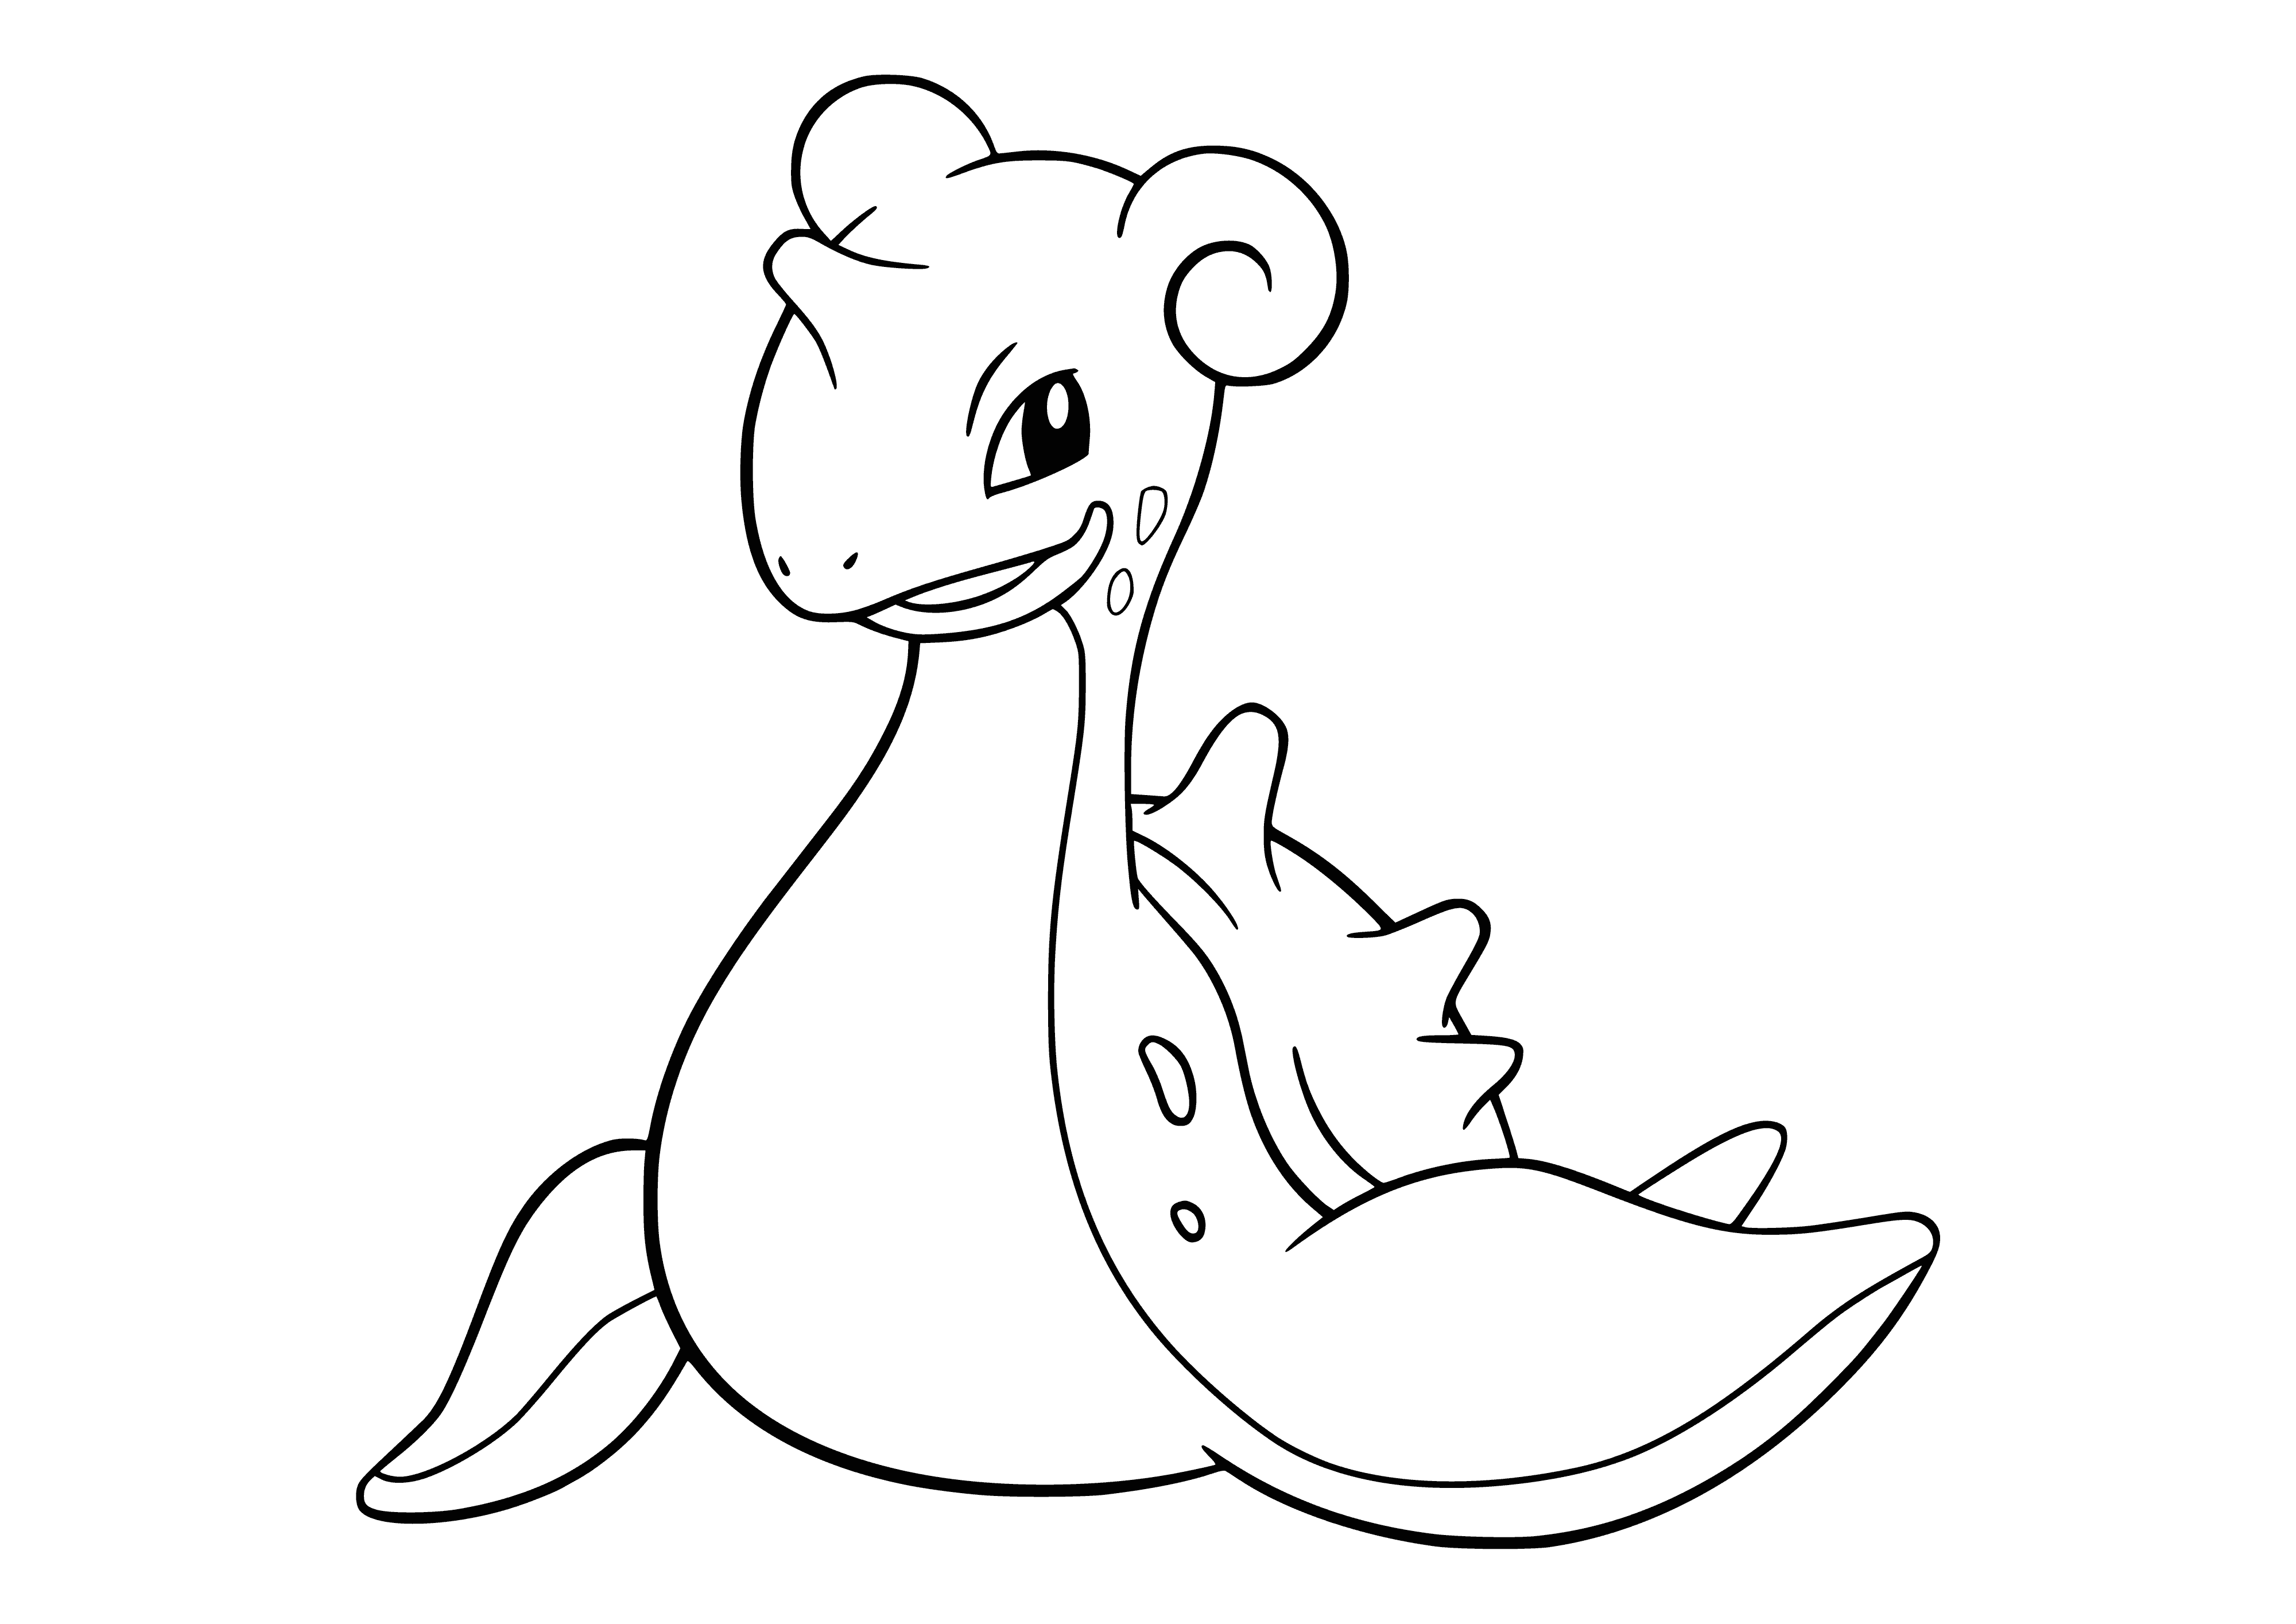 coloring page: Gentle Lapras ferries people across lakes & rivers w/ its long neck, white carapace, fin-like limbs & large tail. Kindhearted w/ blue eyes.